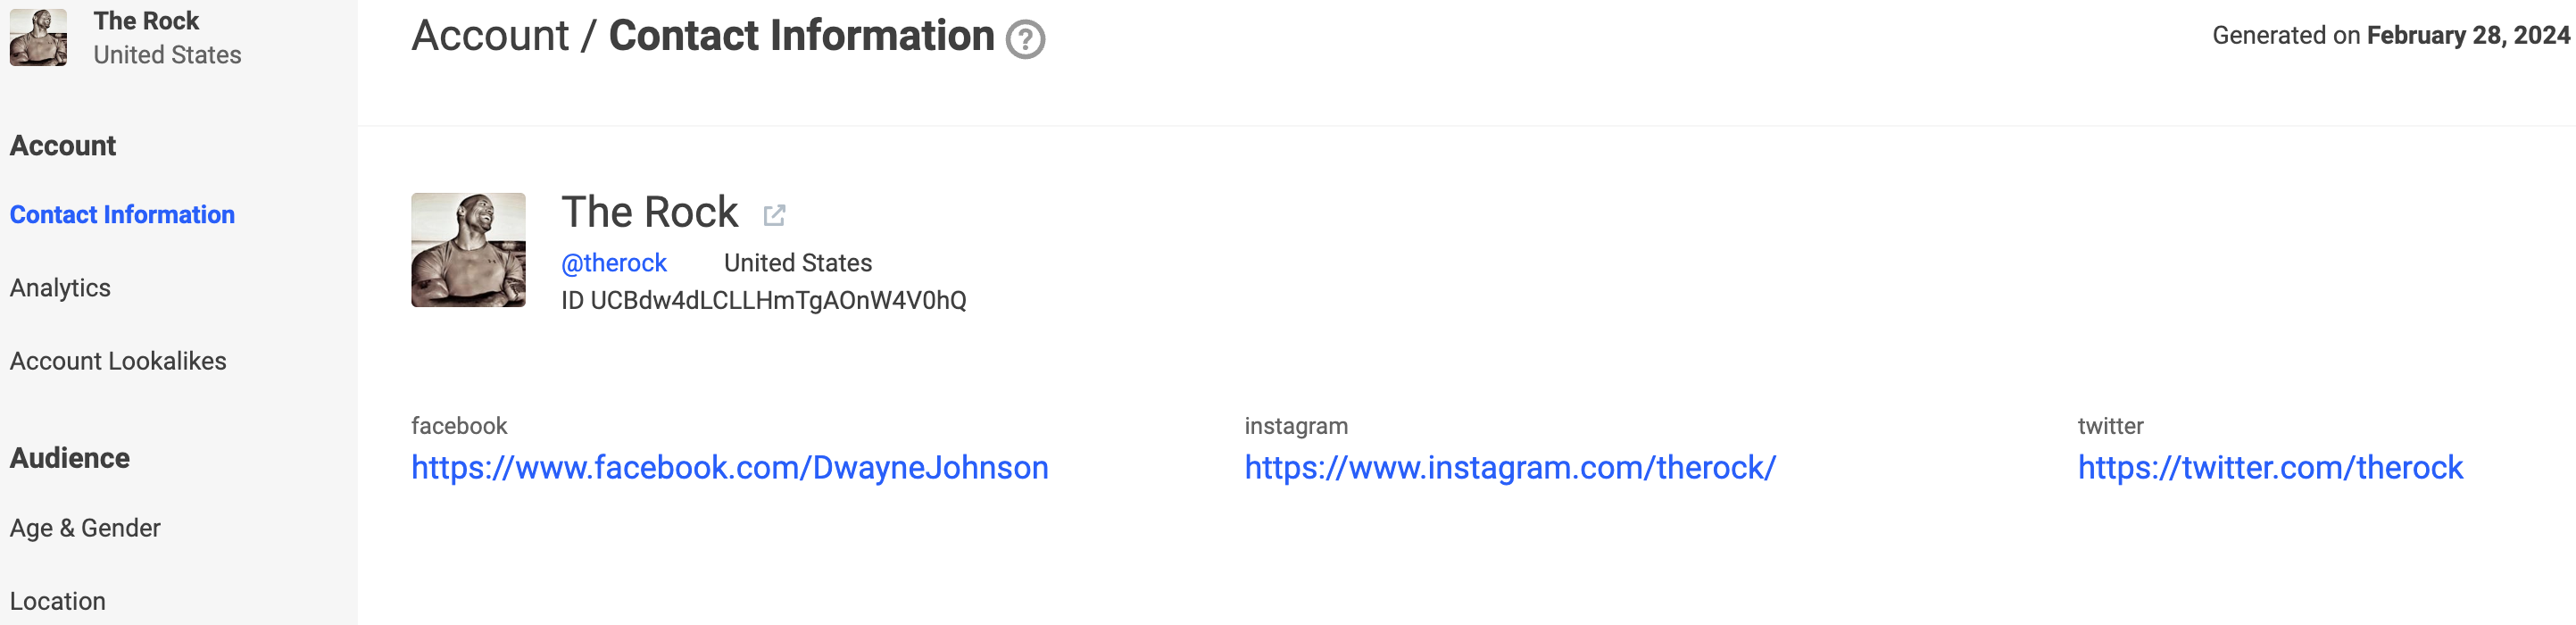 Influencer report contact information Instagram account.png